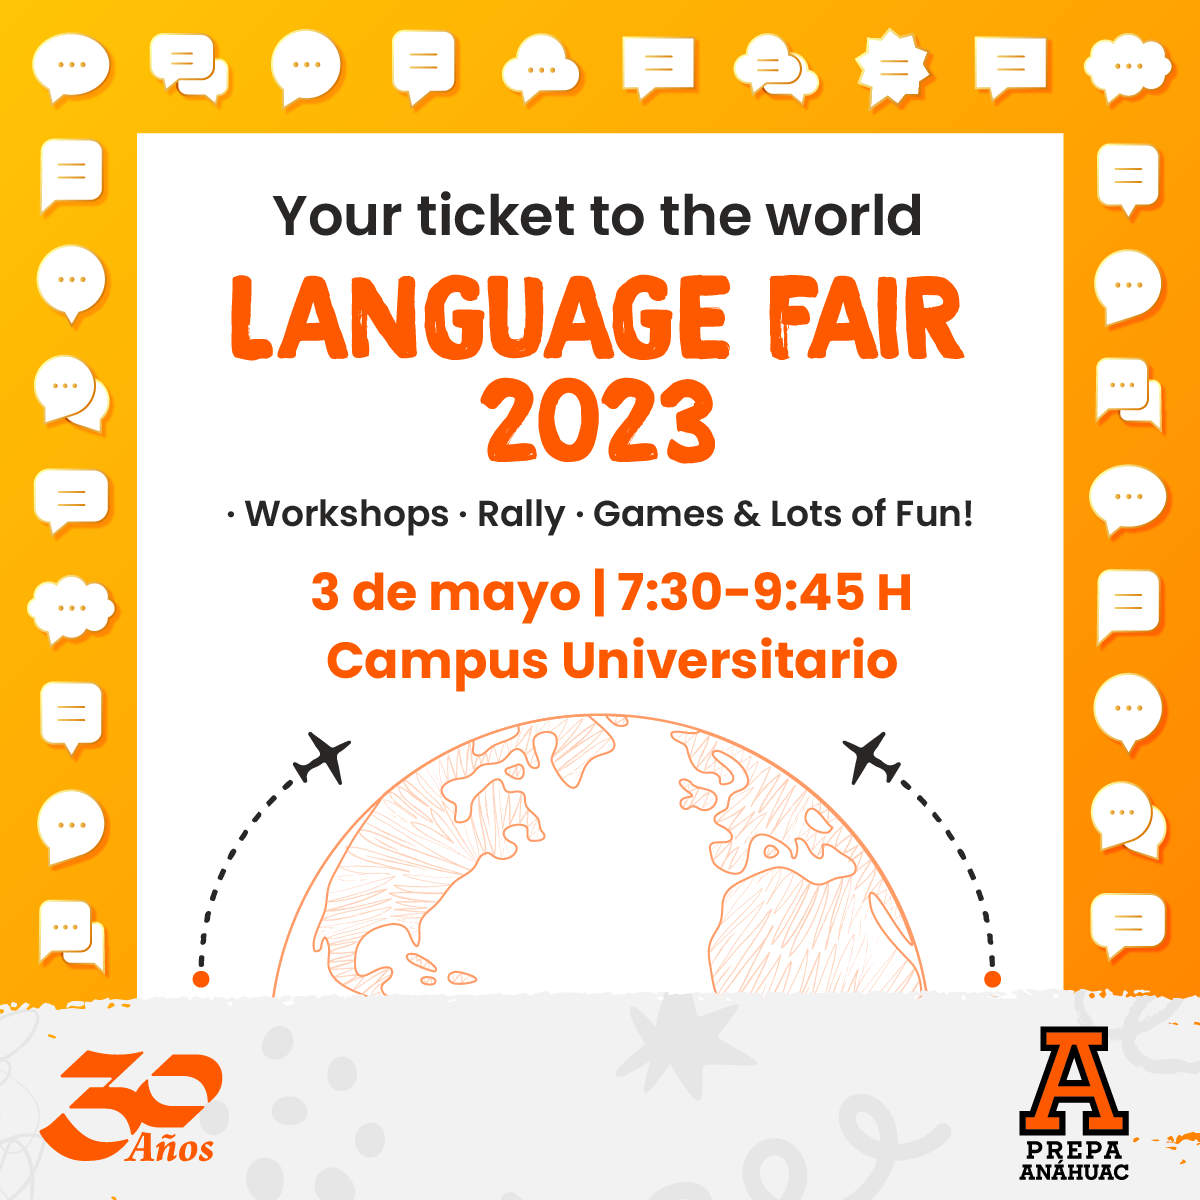 Language Fair 2023: Your Ticket to the World